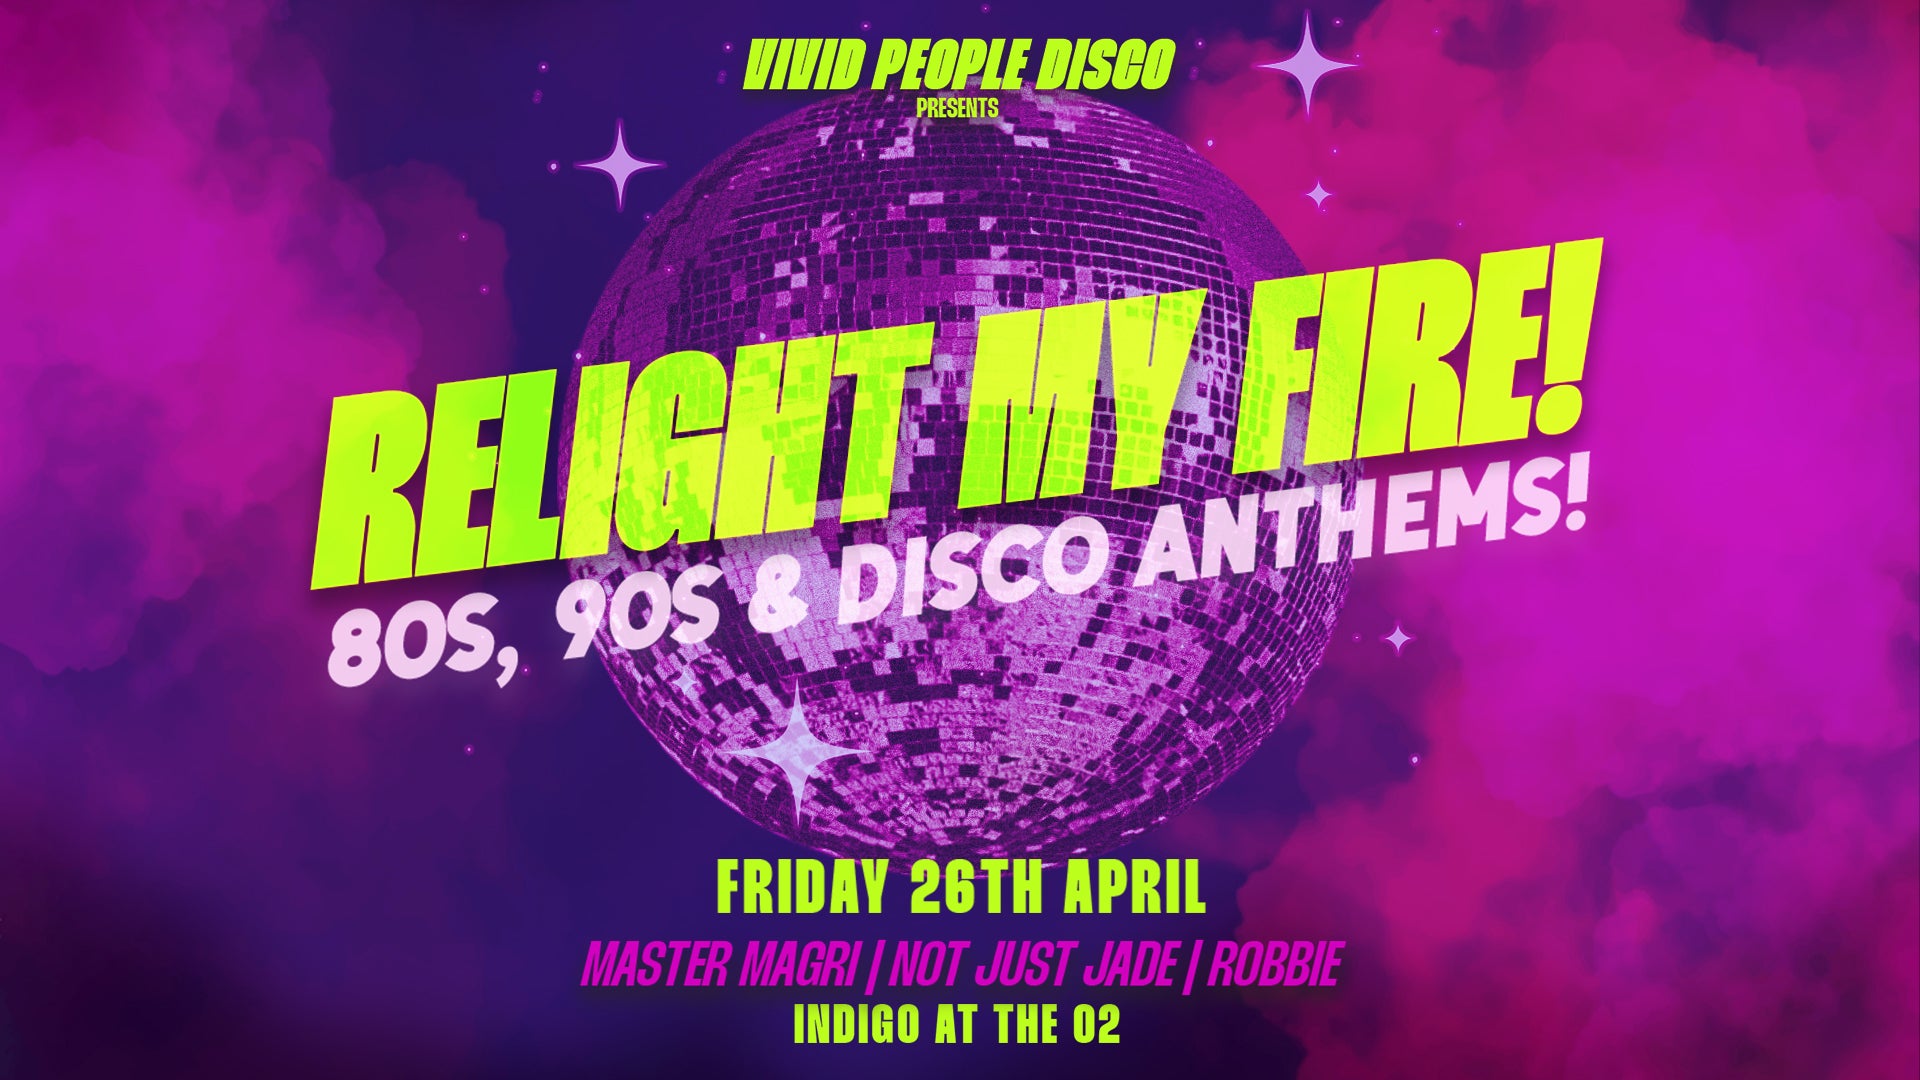 More Info for Vivid People Disco presents Relight My Fire